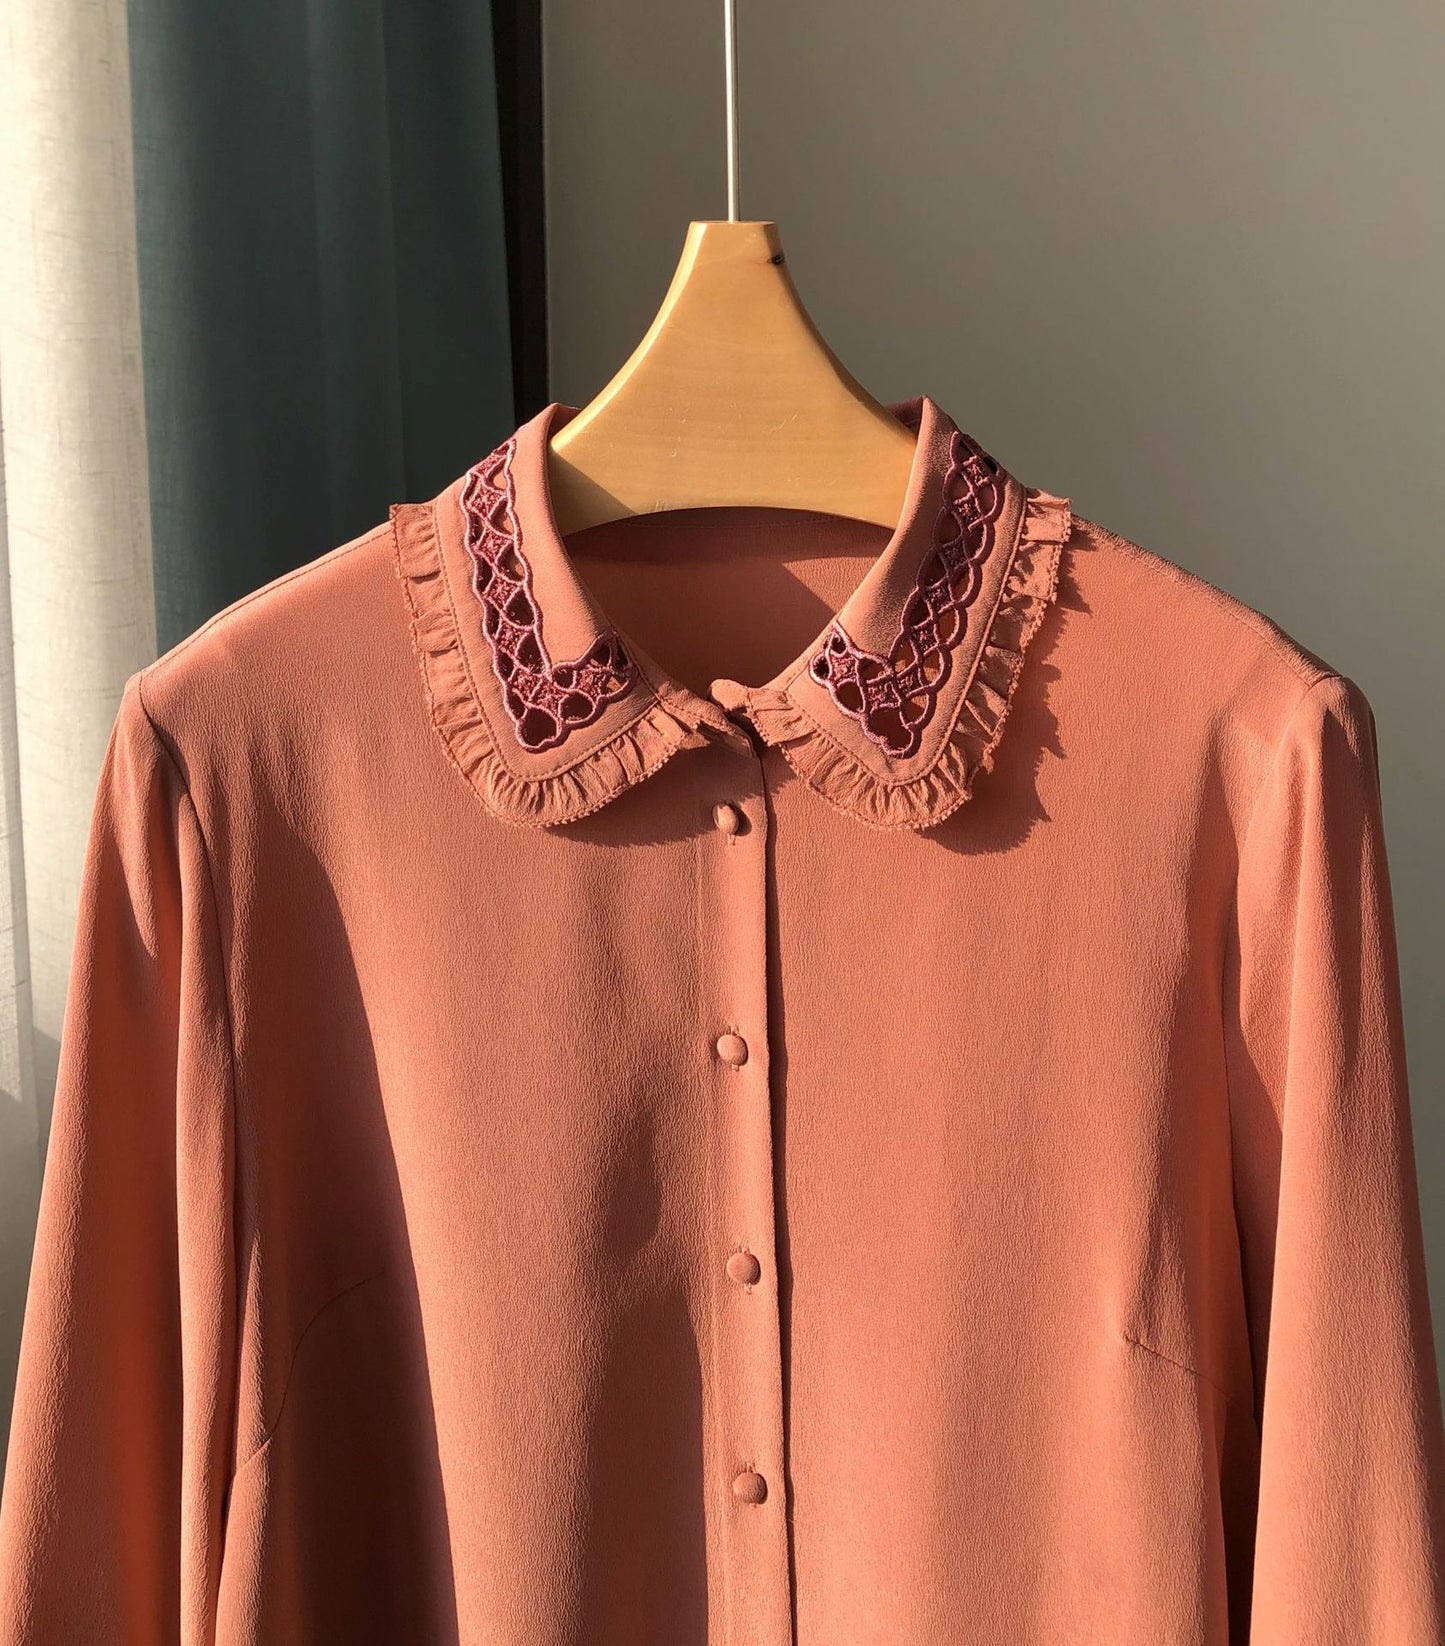 Heavy Embroidered Lace Collar Long Sleeved Soft Silk Shirt